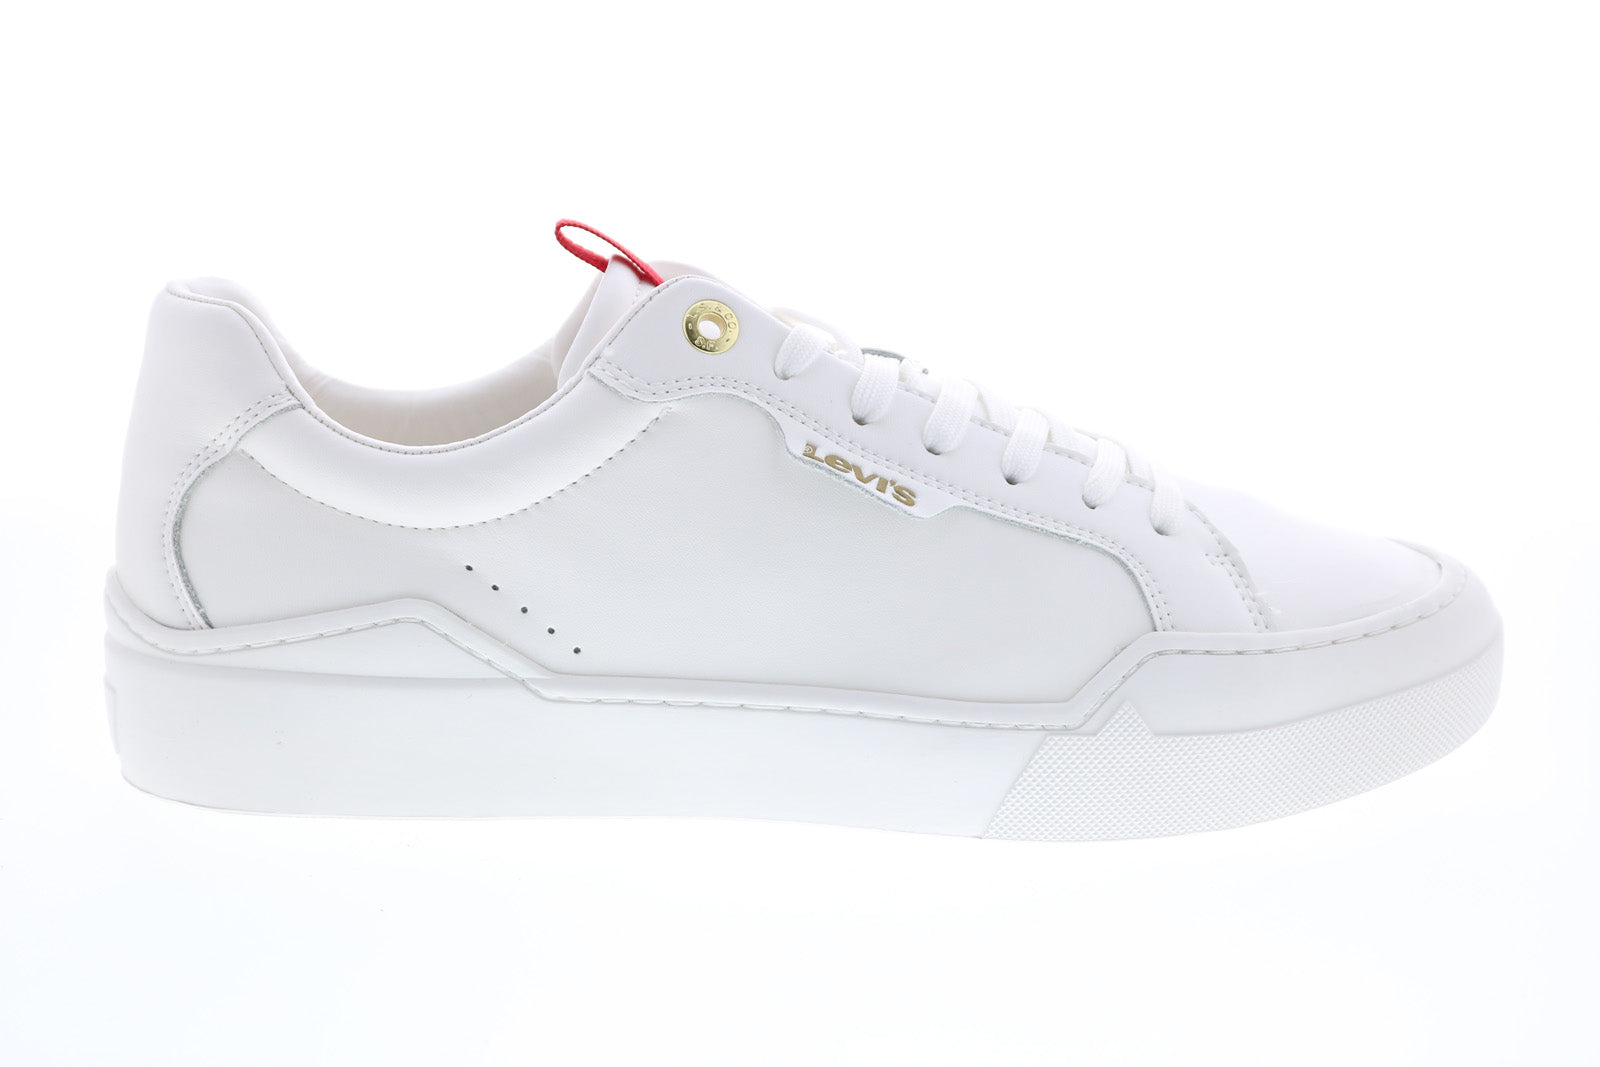 Levis 521 XX Essential LO Leather 519725-W931 Mens White Lifestyle Sneakers  Shoes  - Ruze Shoes